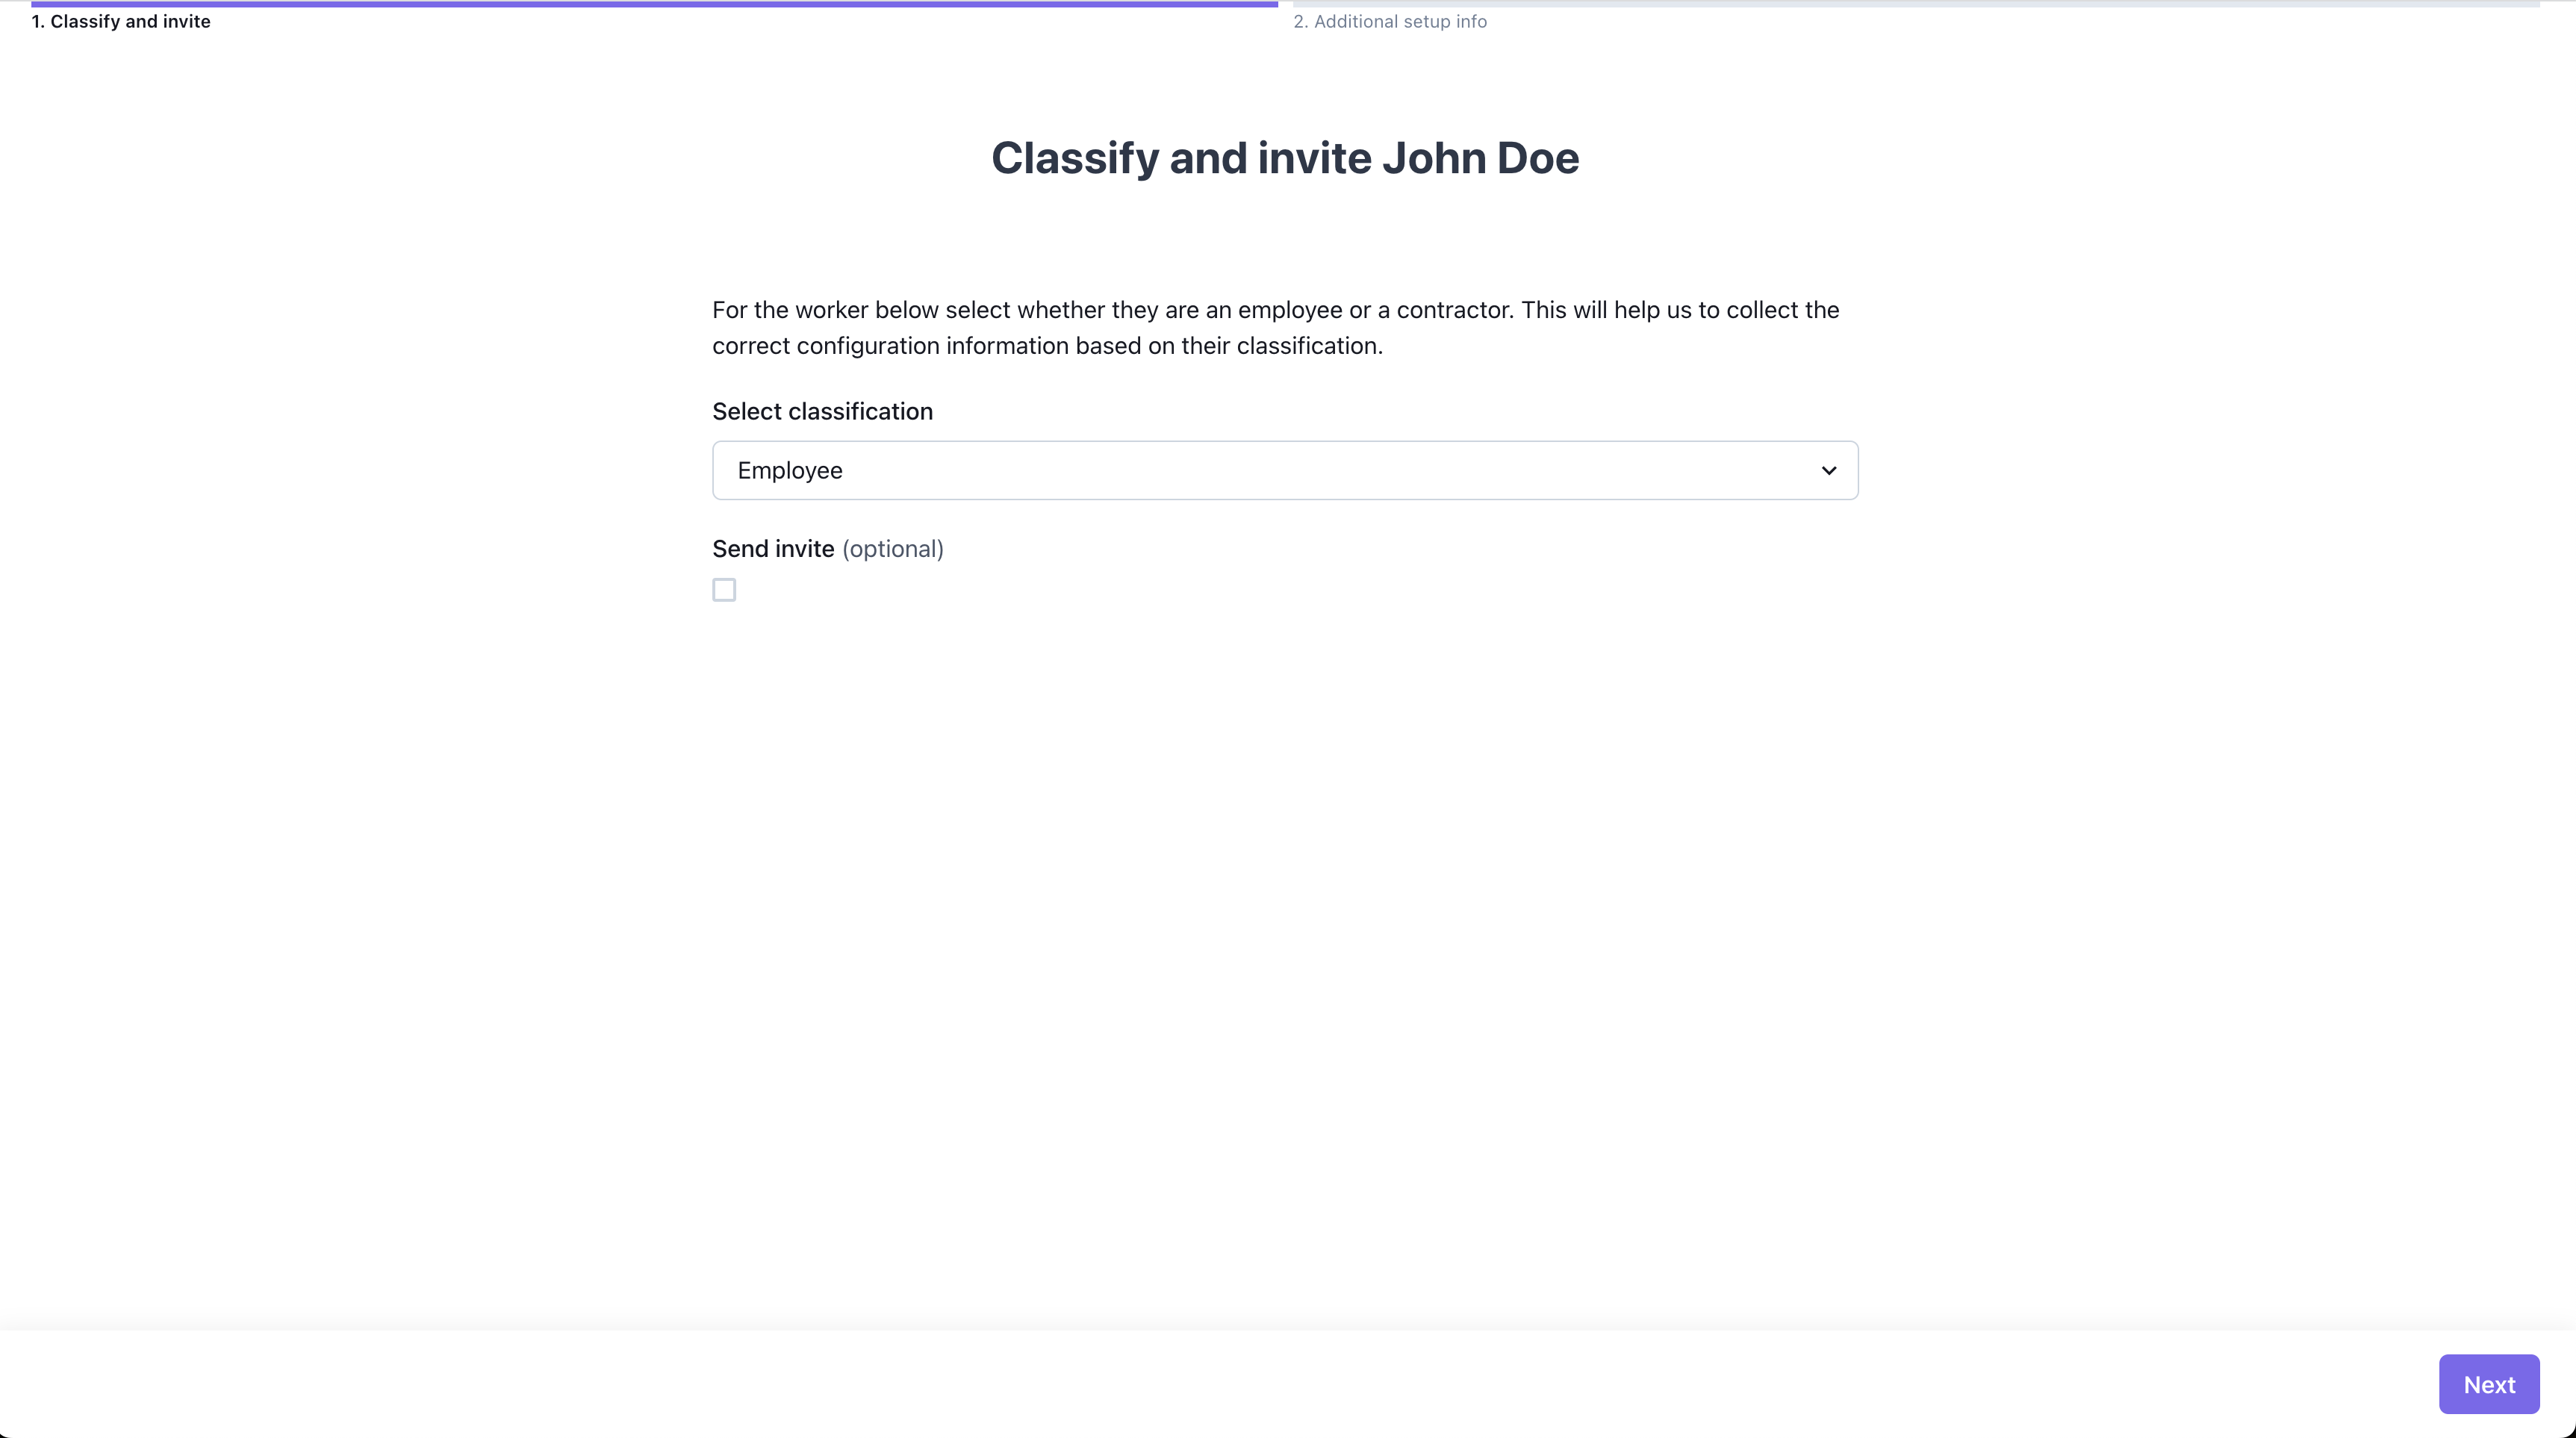 Classify and invite worker step